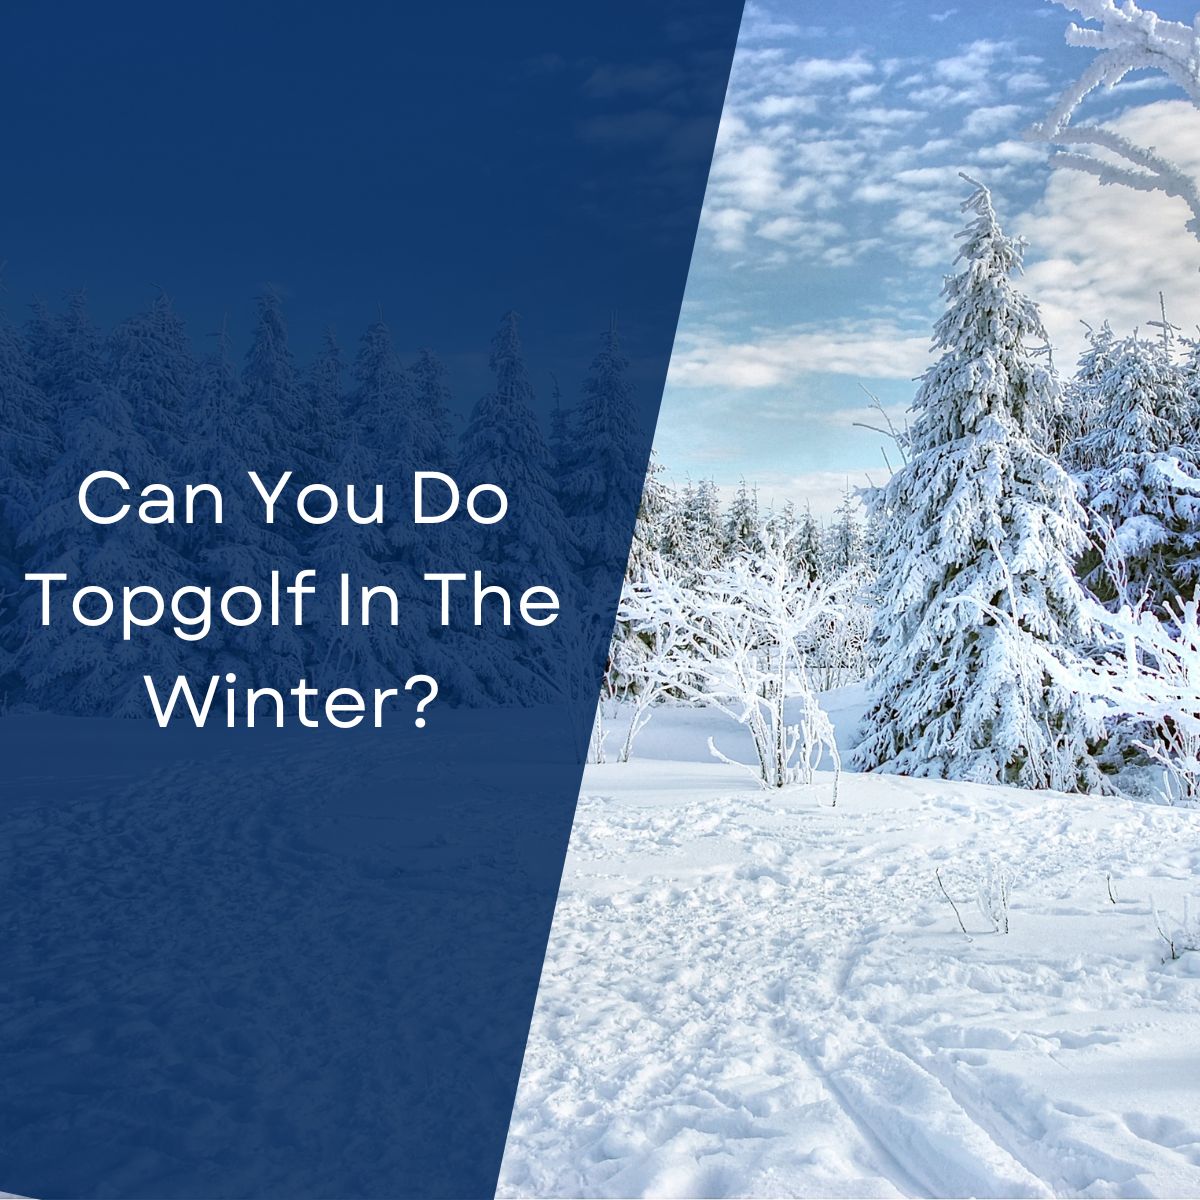 Can You Do Topgolf In The Winter?